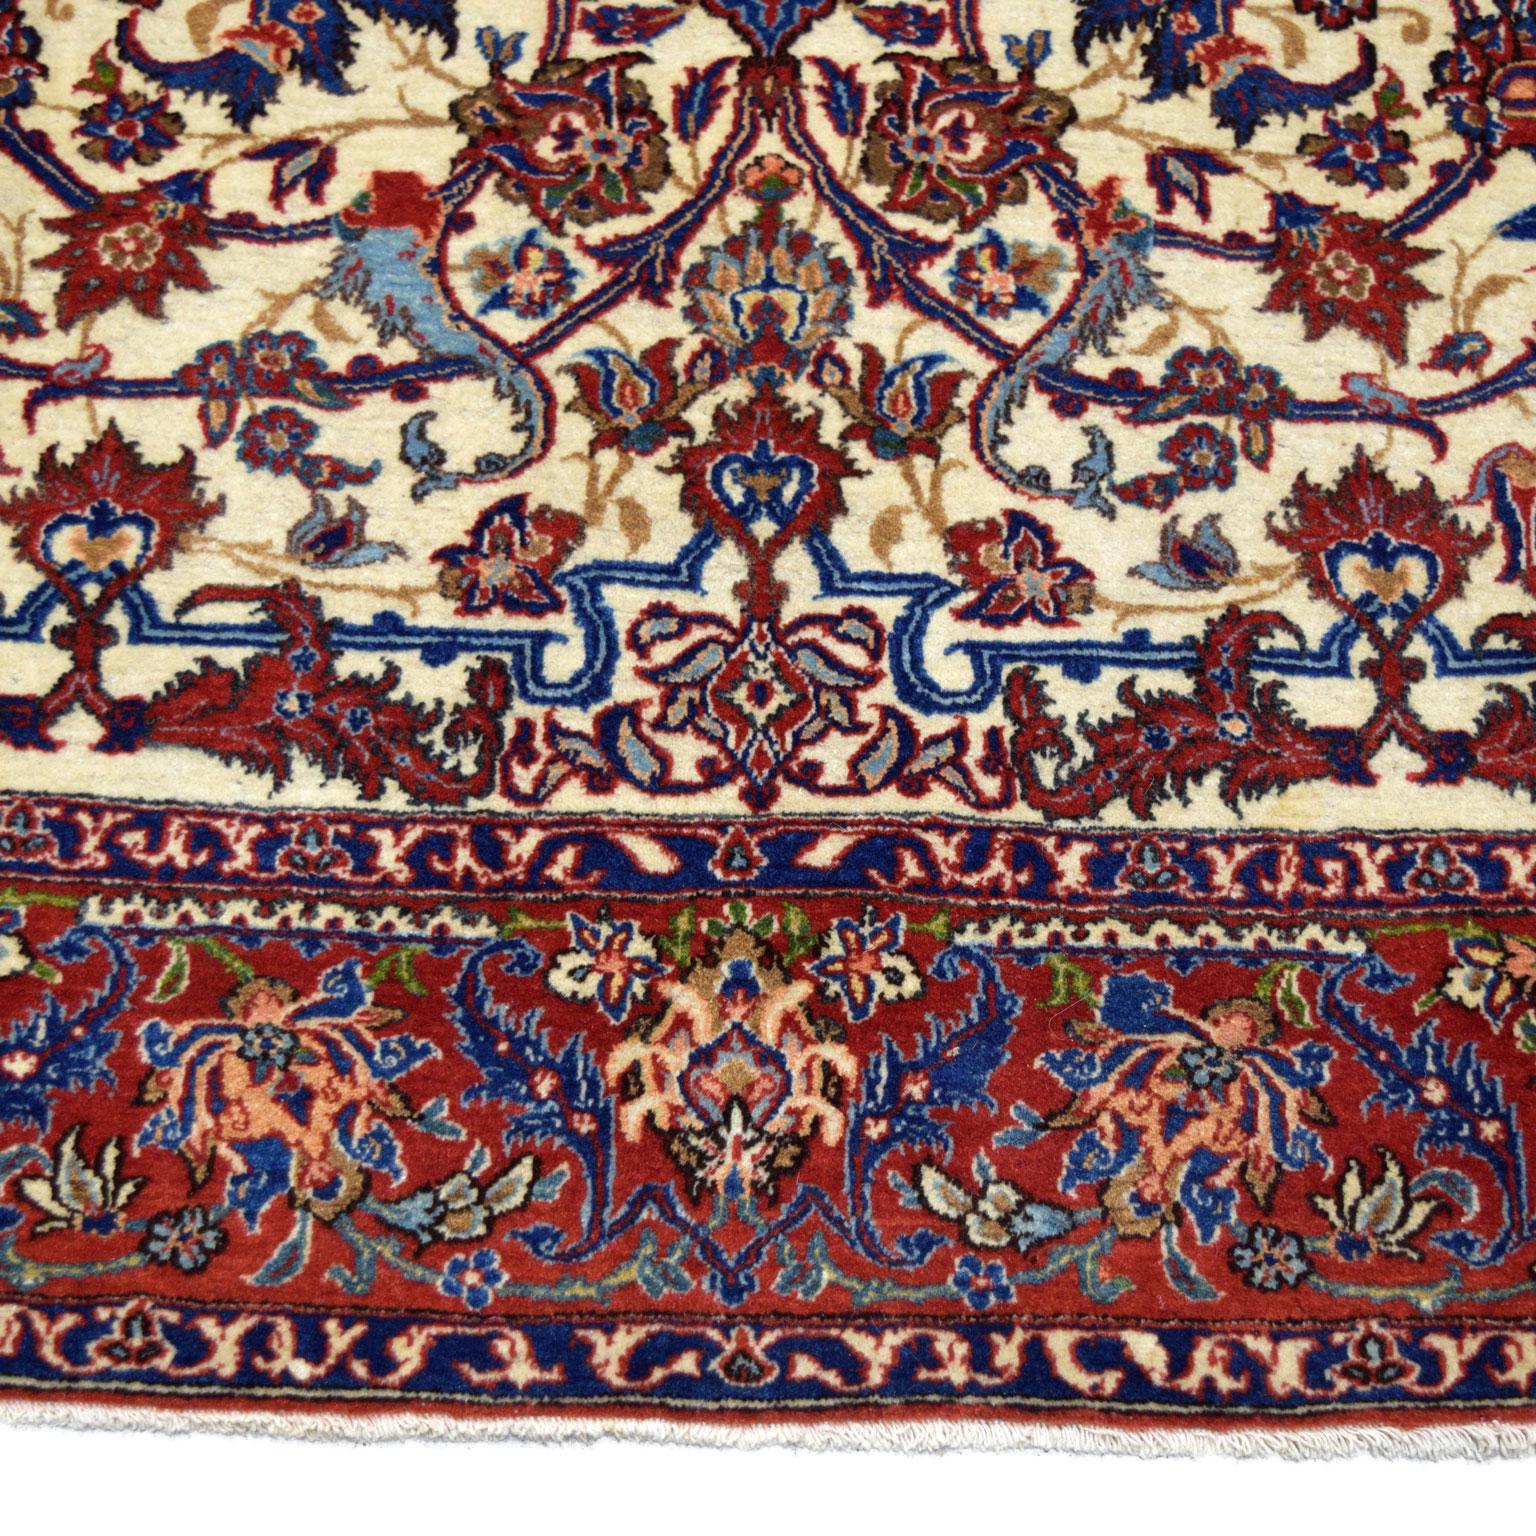 Early 20th Century Antique 1900s Woo Persian Isfahan Rug, Red, Cream, and Gold, 5' x 7' For Sale